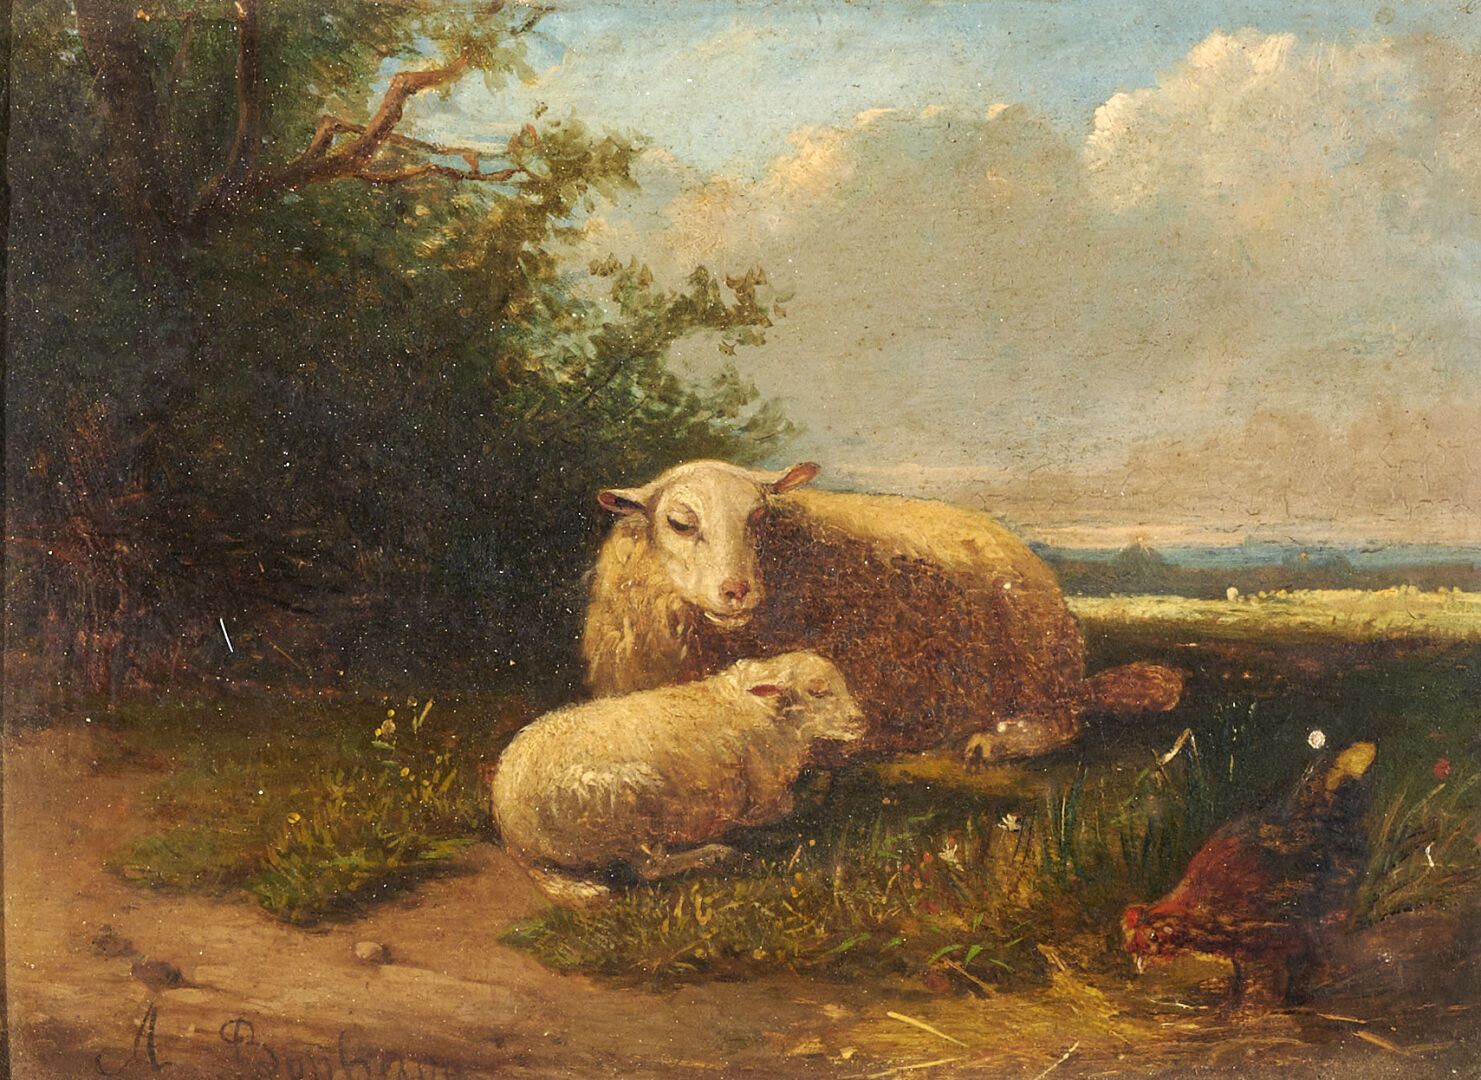 Null Auguste François BONHEUR (1824-1884)

"Sheep and hen in the countryside".

&hellip;